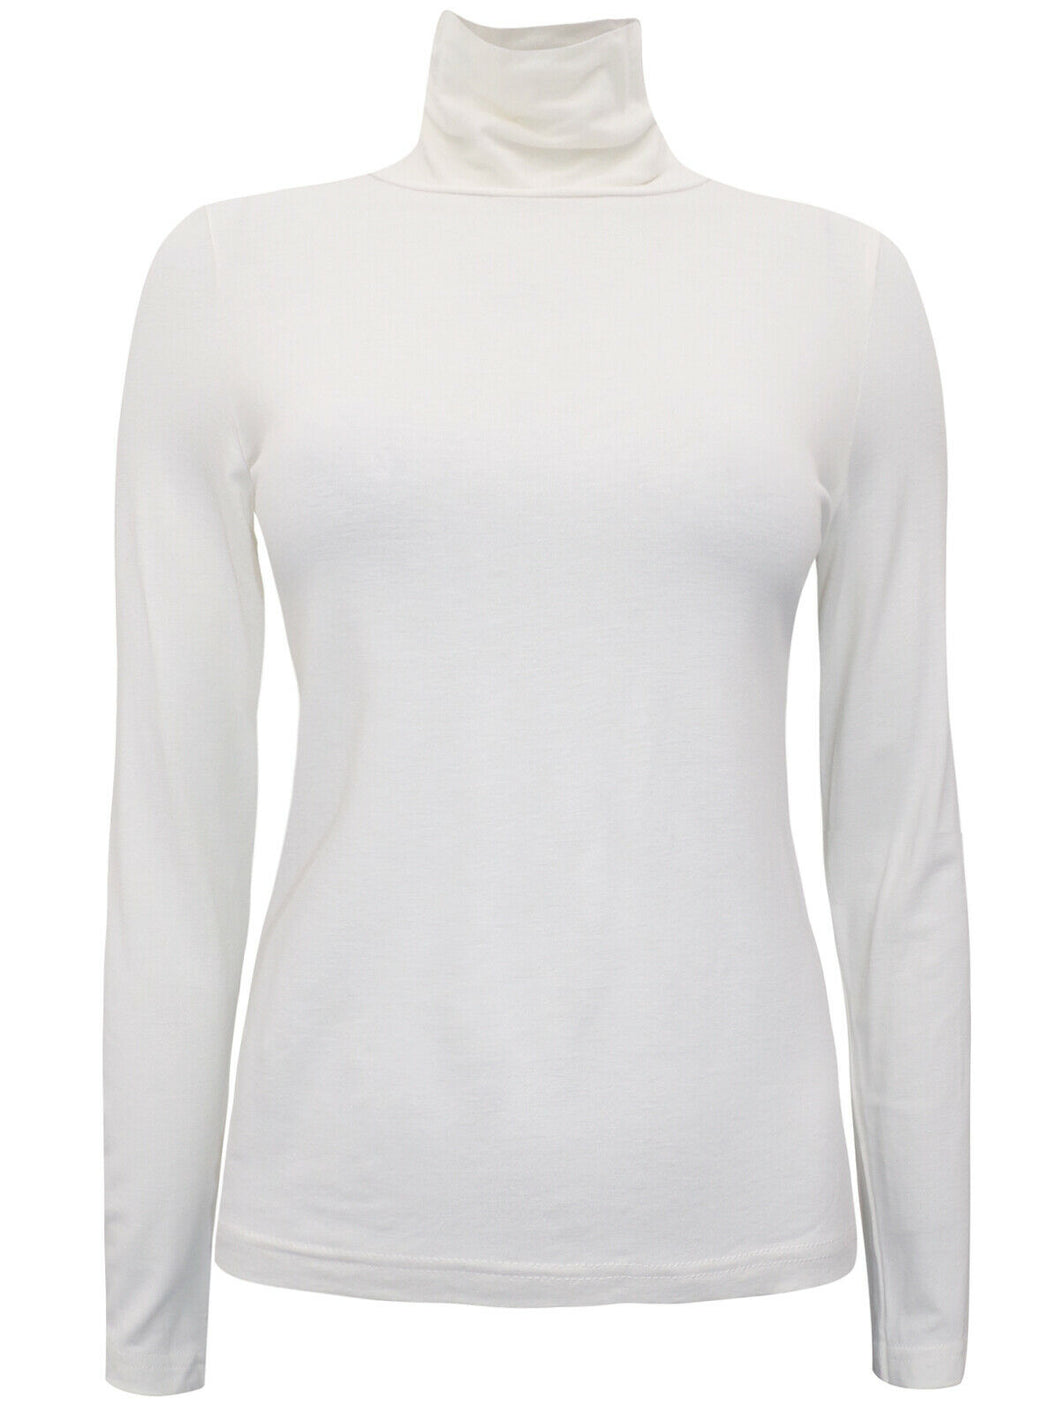 Cream Turtle Roll Neck Stretchy Jersey Top